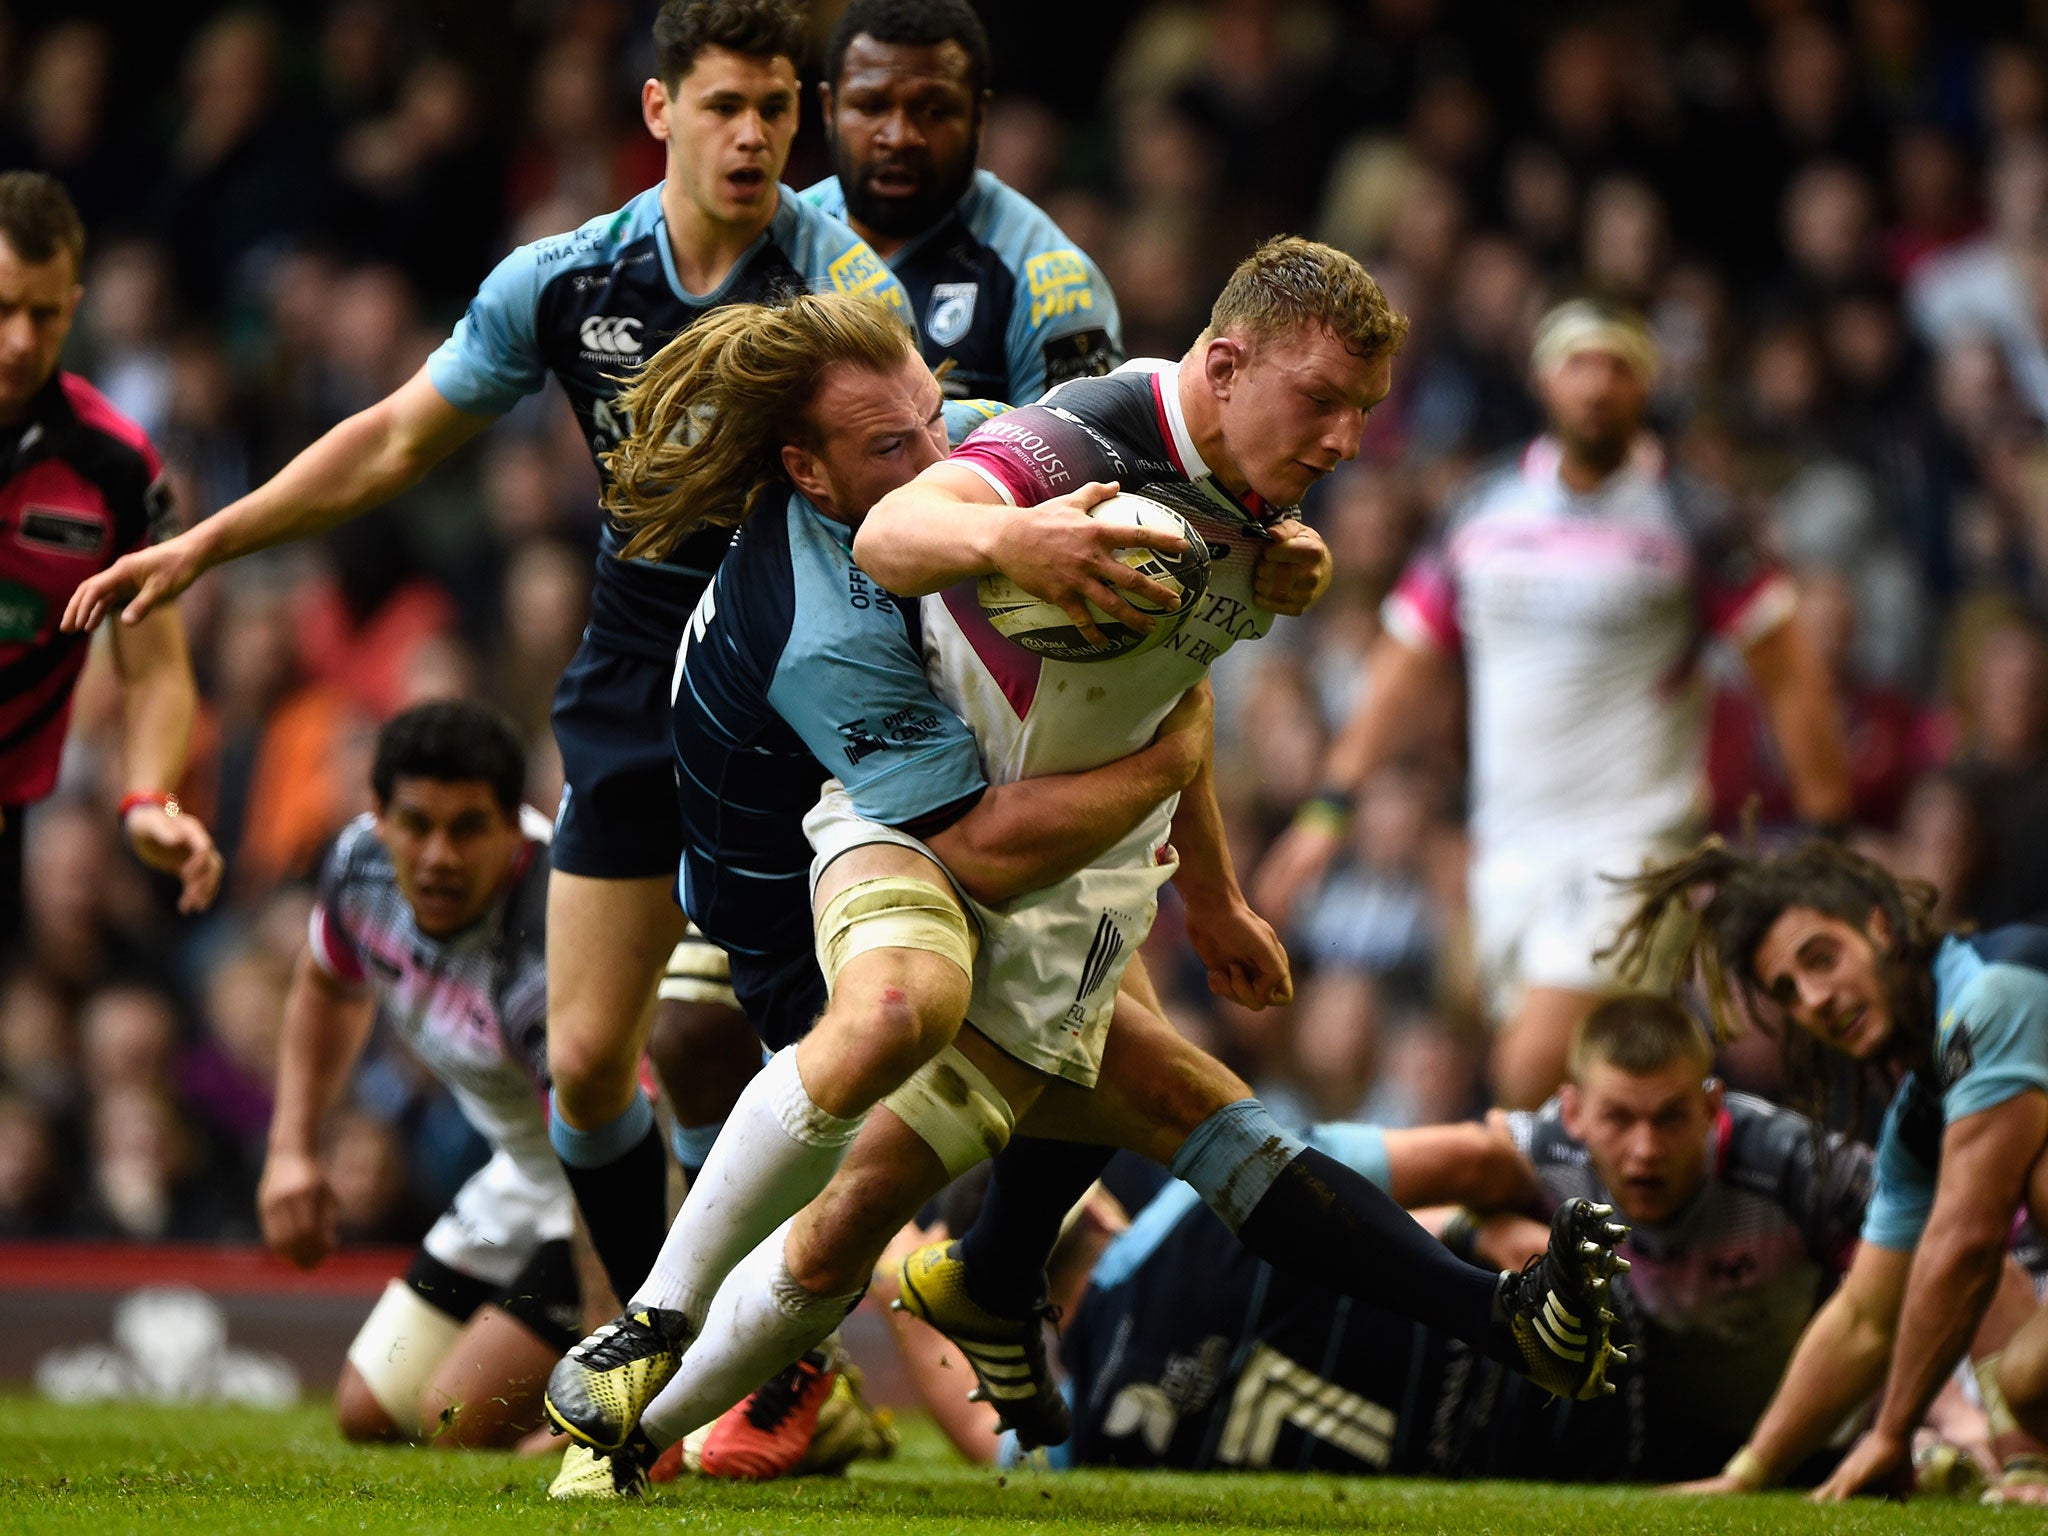 Sam Underhill is unlikely to receive an England call-up for the Six Nations